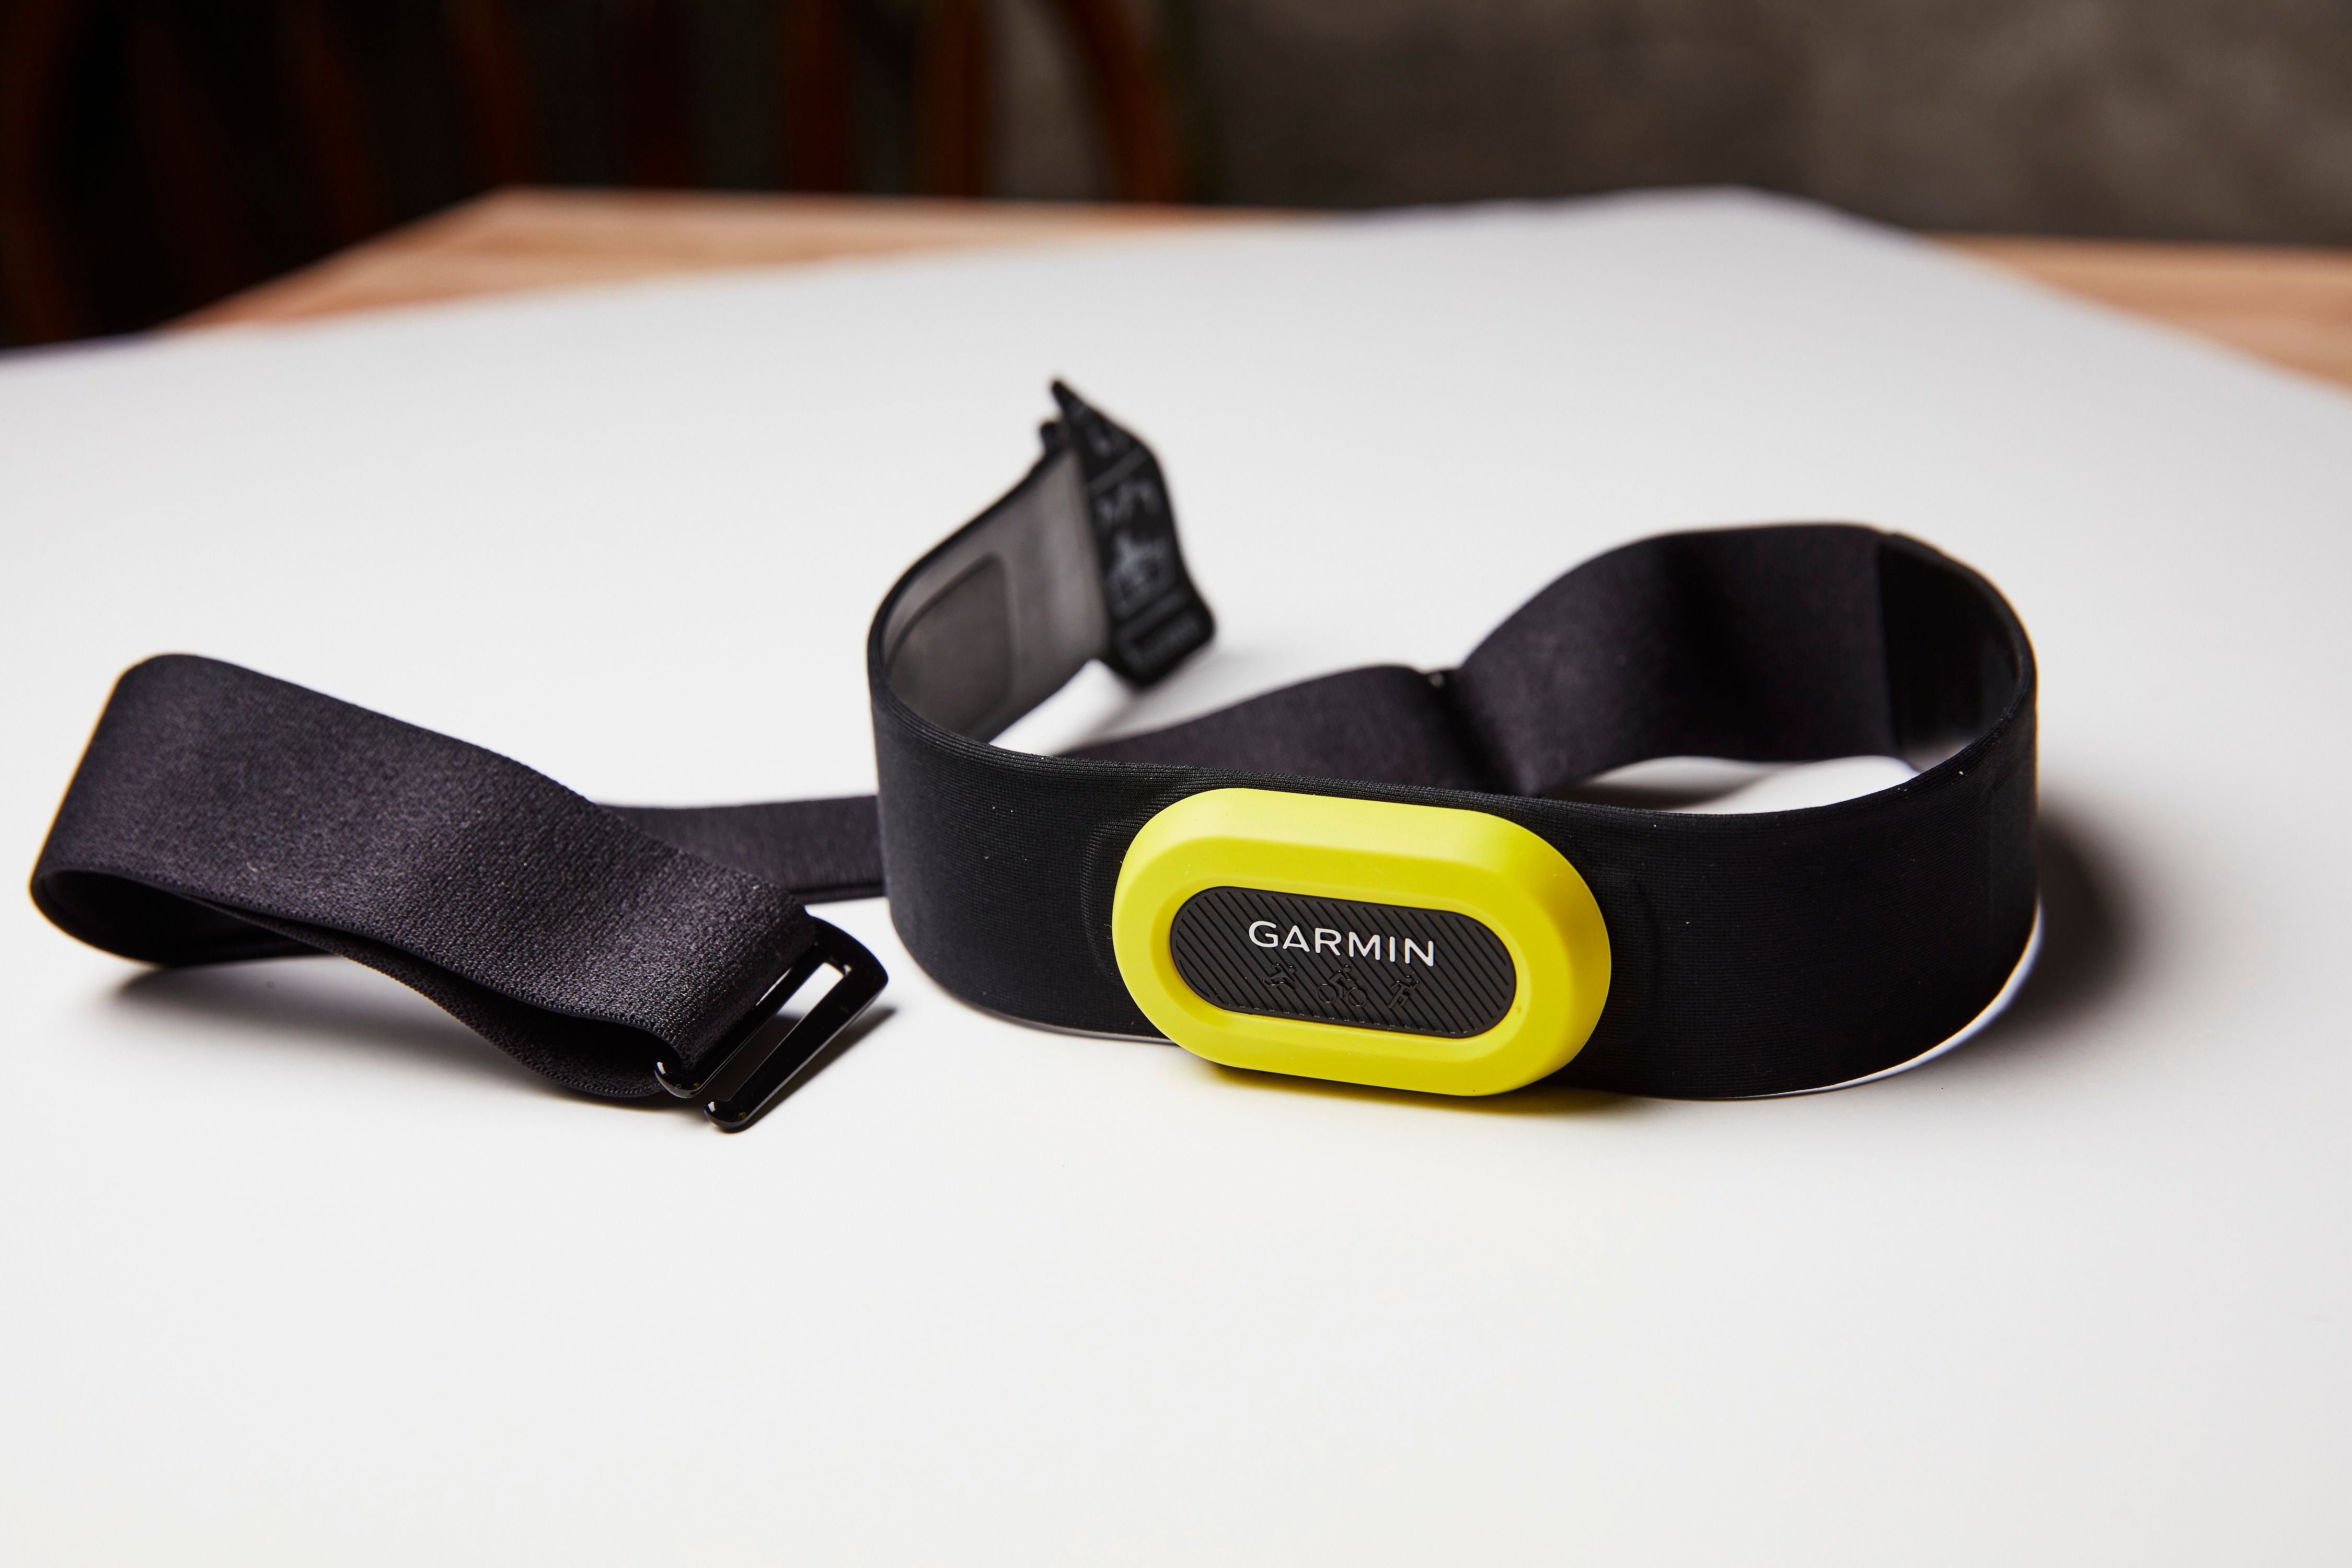 Why Should You Buy the Garmin HRM-Pro Plus Heart Rate Monitor